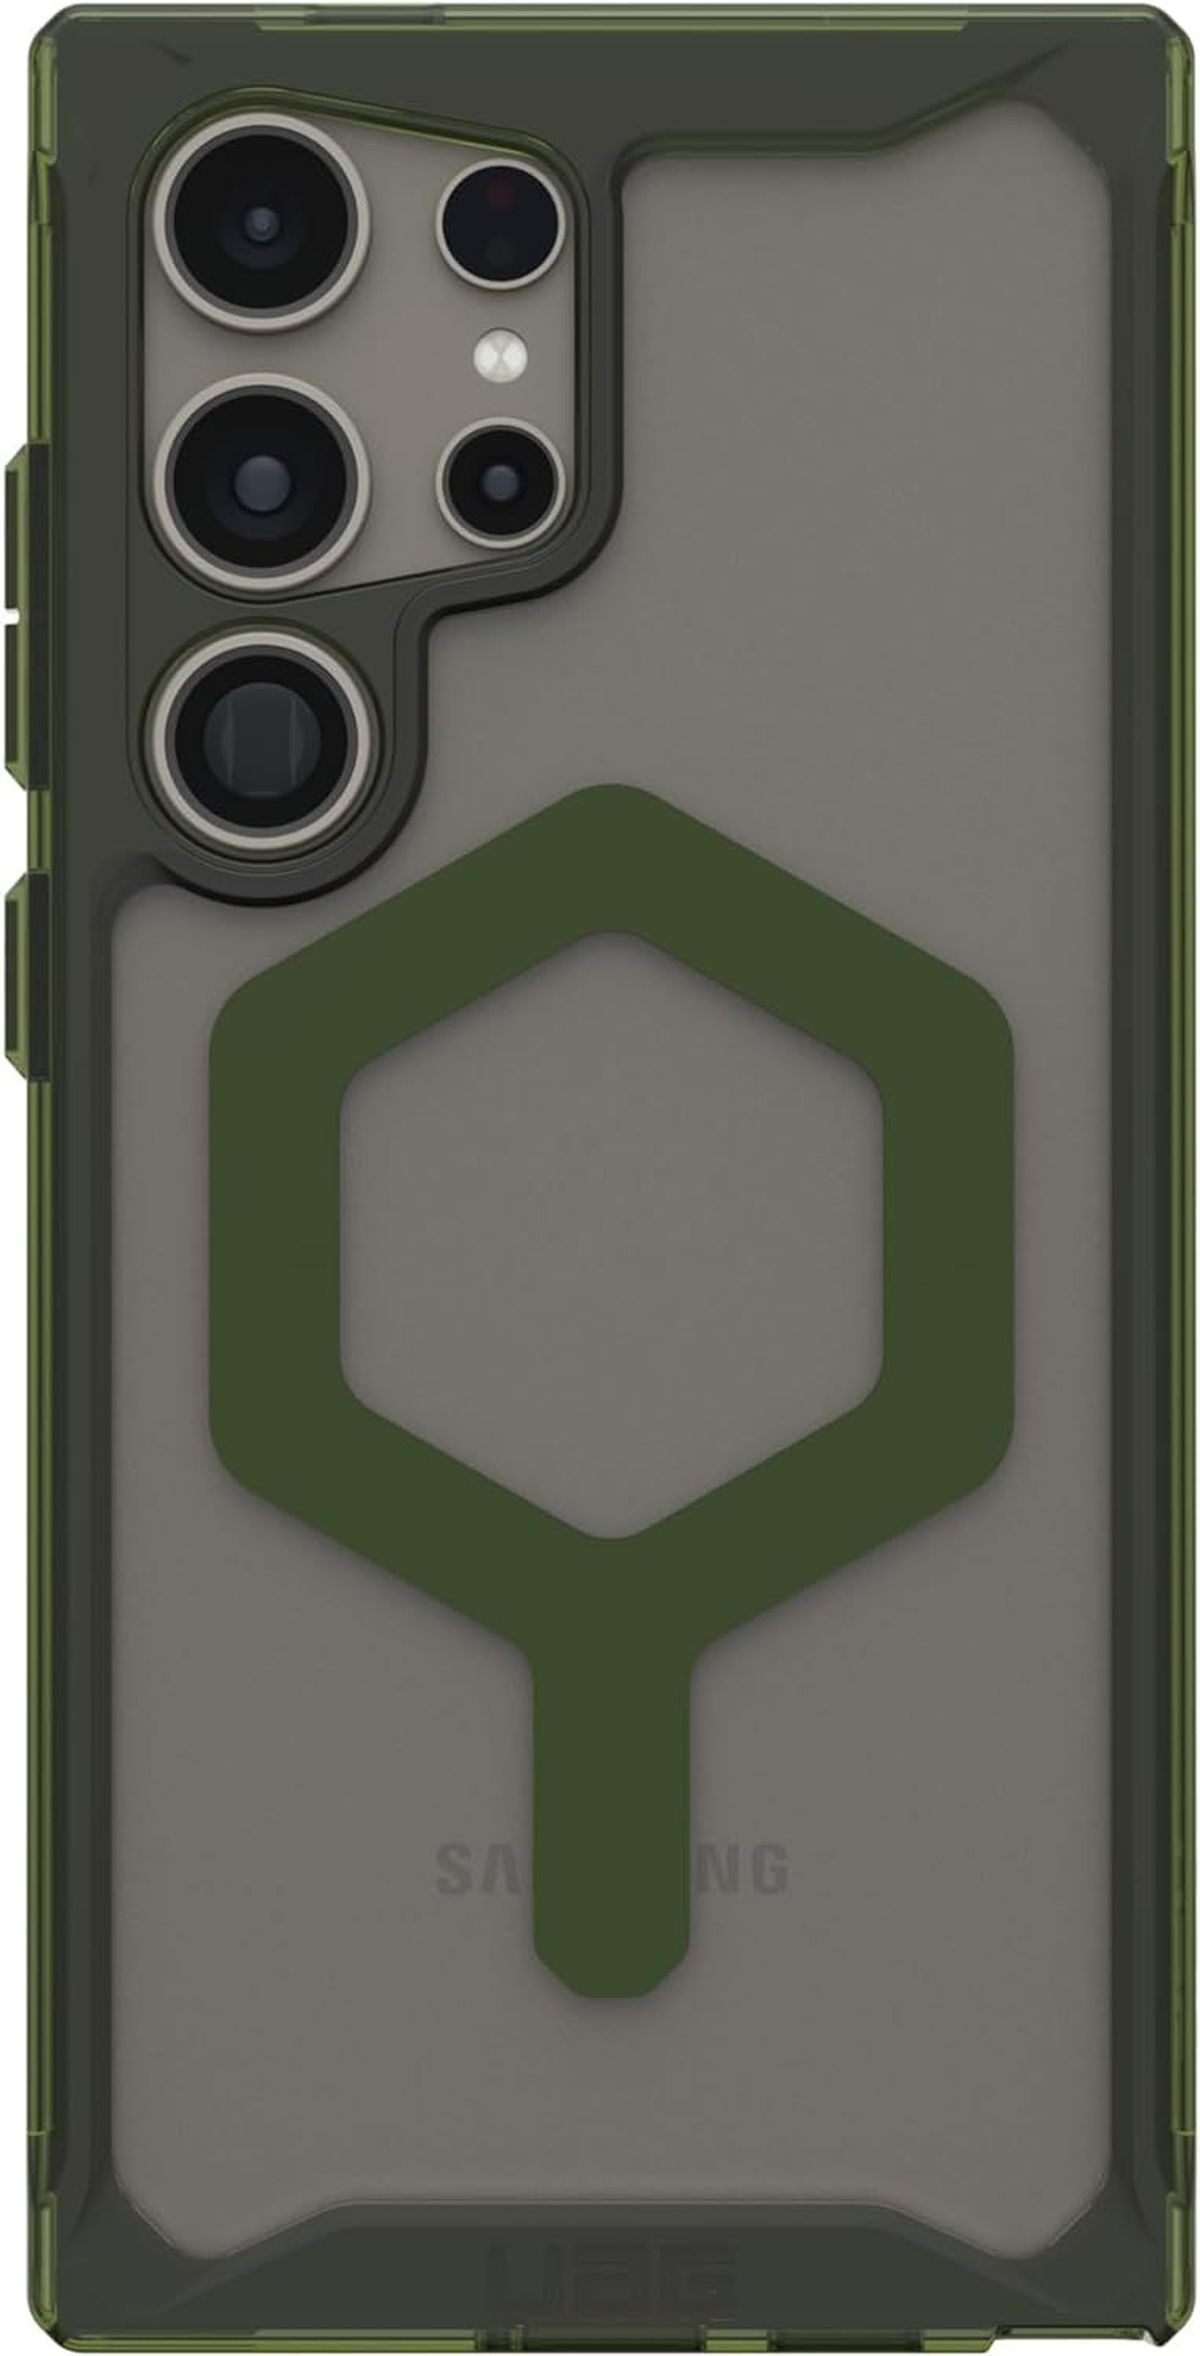 URBAN ARMOR / 5G, ice Backcover, Pro, olive S24 Galaxy Plyo Samsung, GEAR Ultra (transparent)